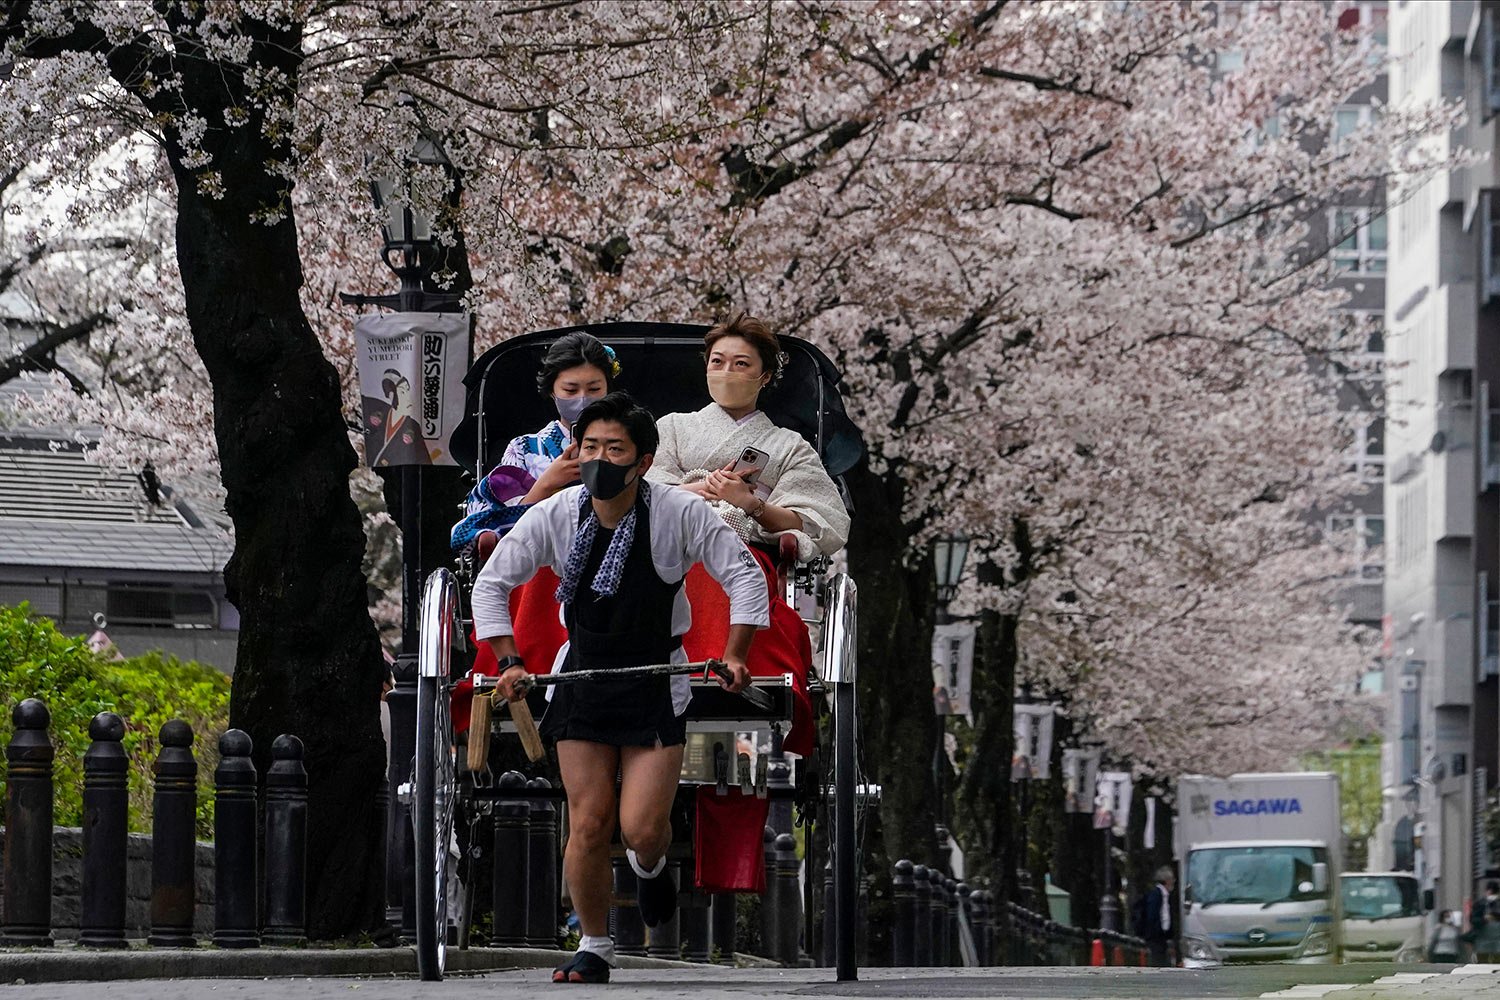  Women wearing traditional Kimono outfits take a rickshaw ride under a canopy of the cherry blossoms in full bloom Thursday, March 31, 2022, in Tokyo.  (AP Photo/Kiichiro Sato) 